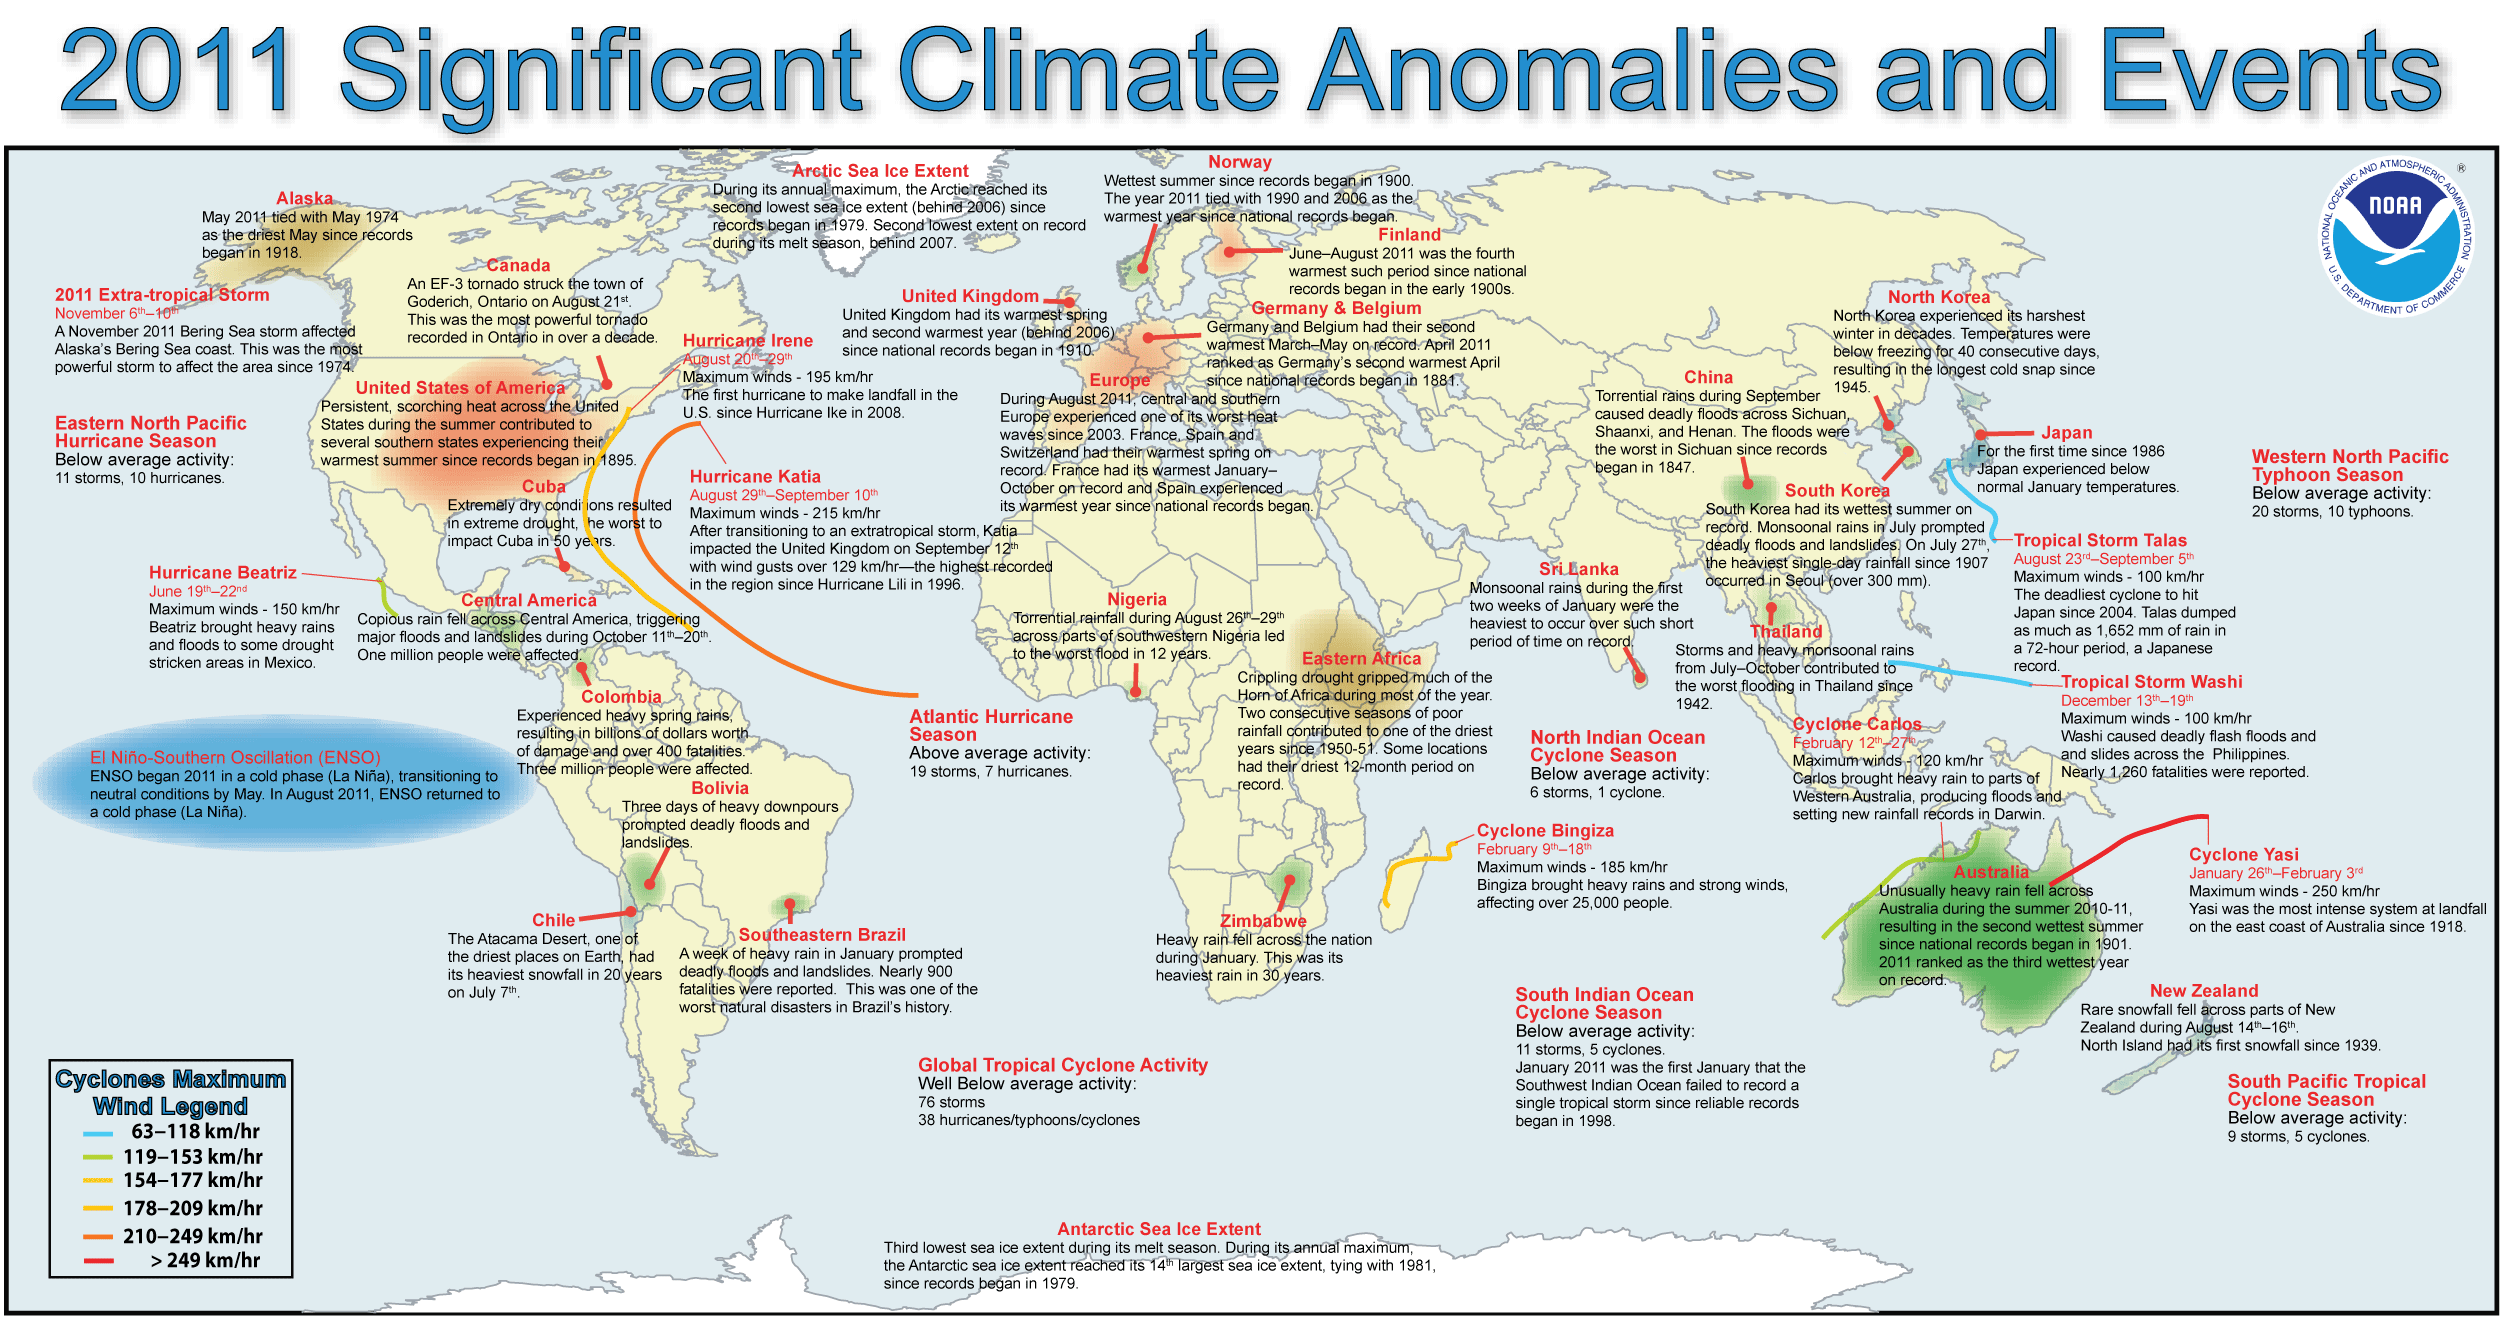 Significant Climate Anomalies and Events in 2011